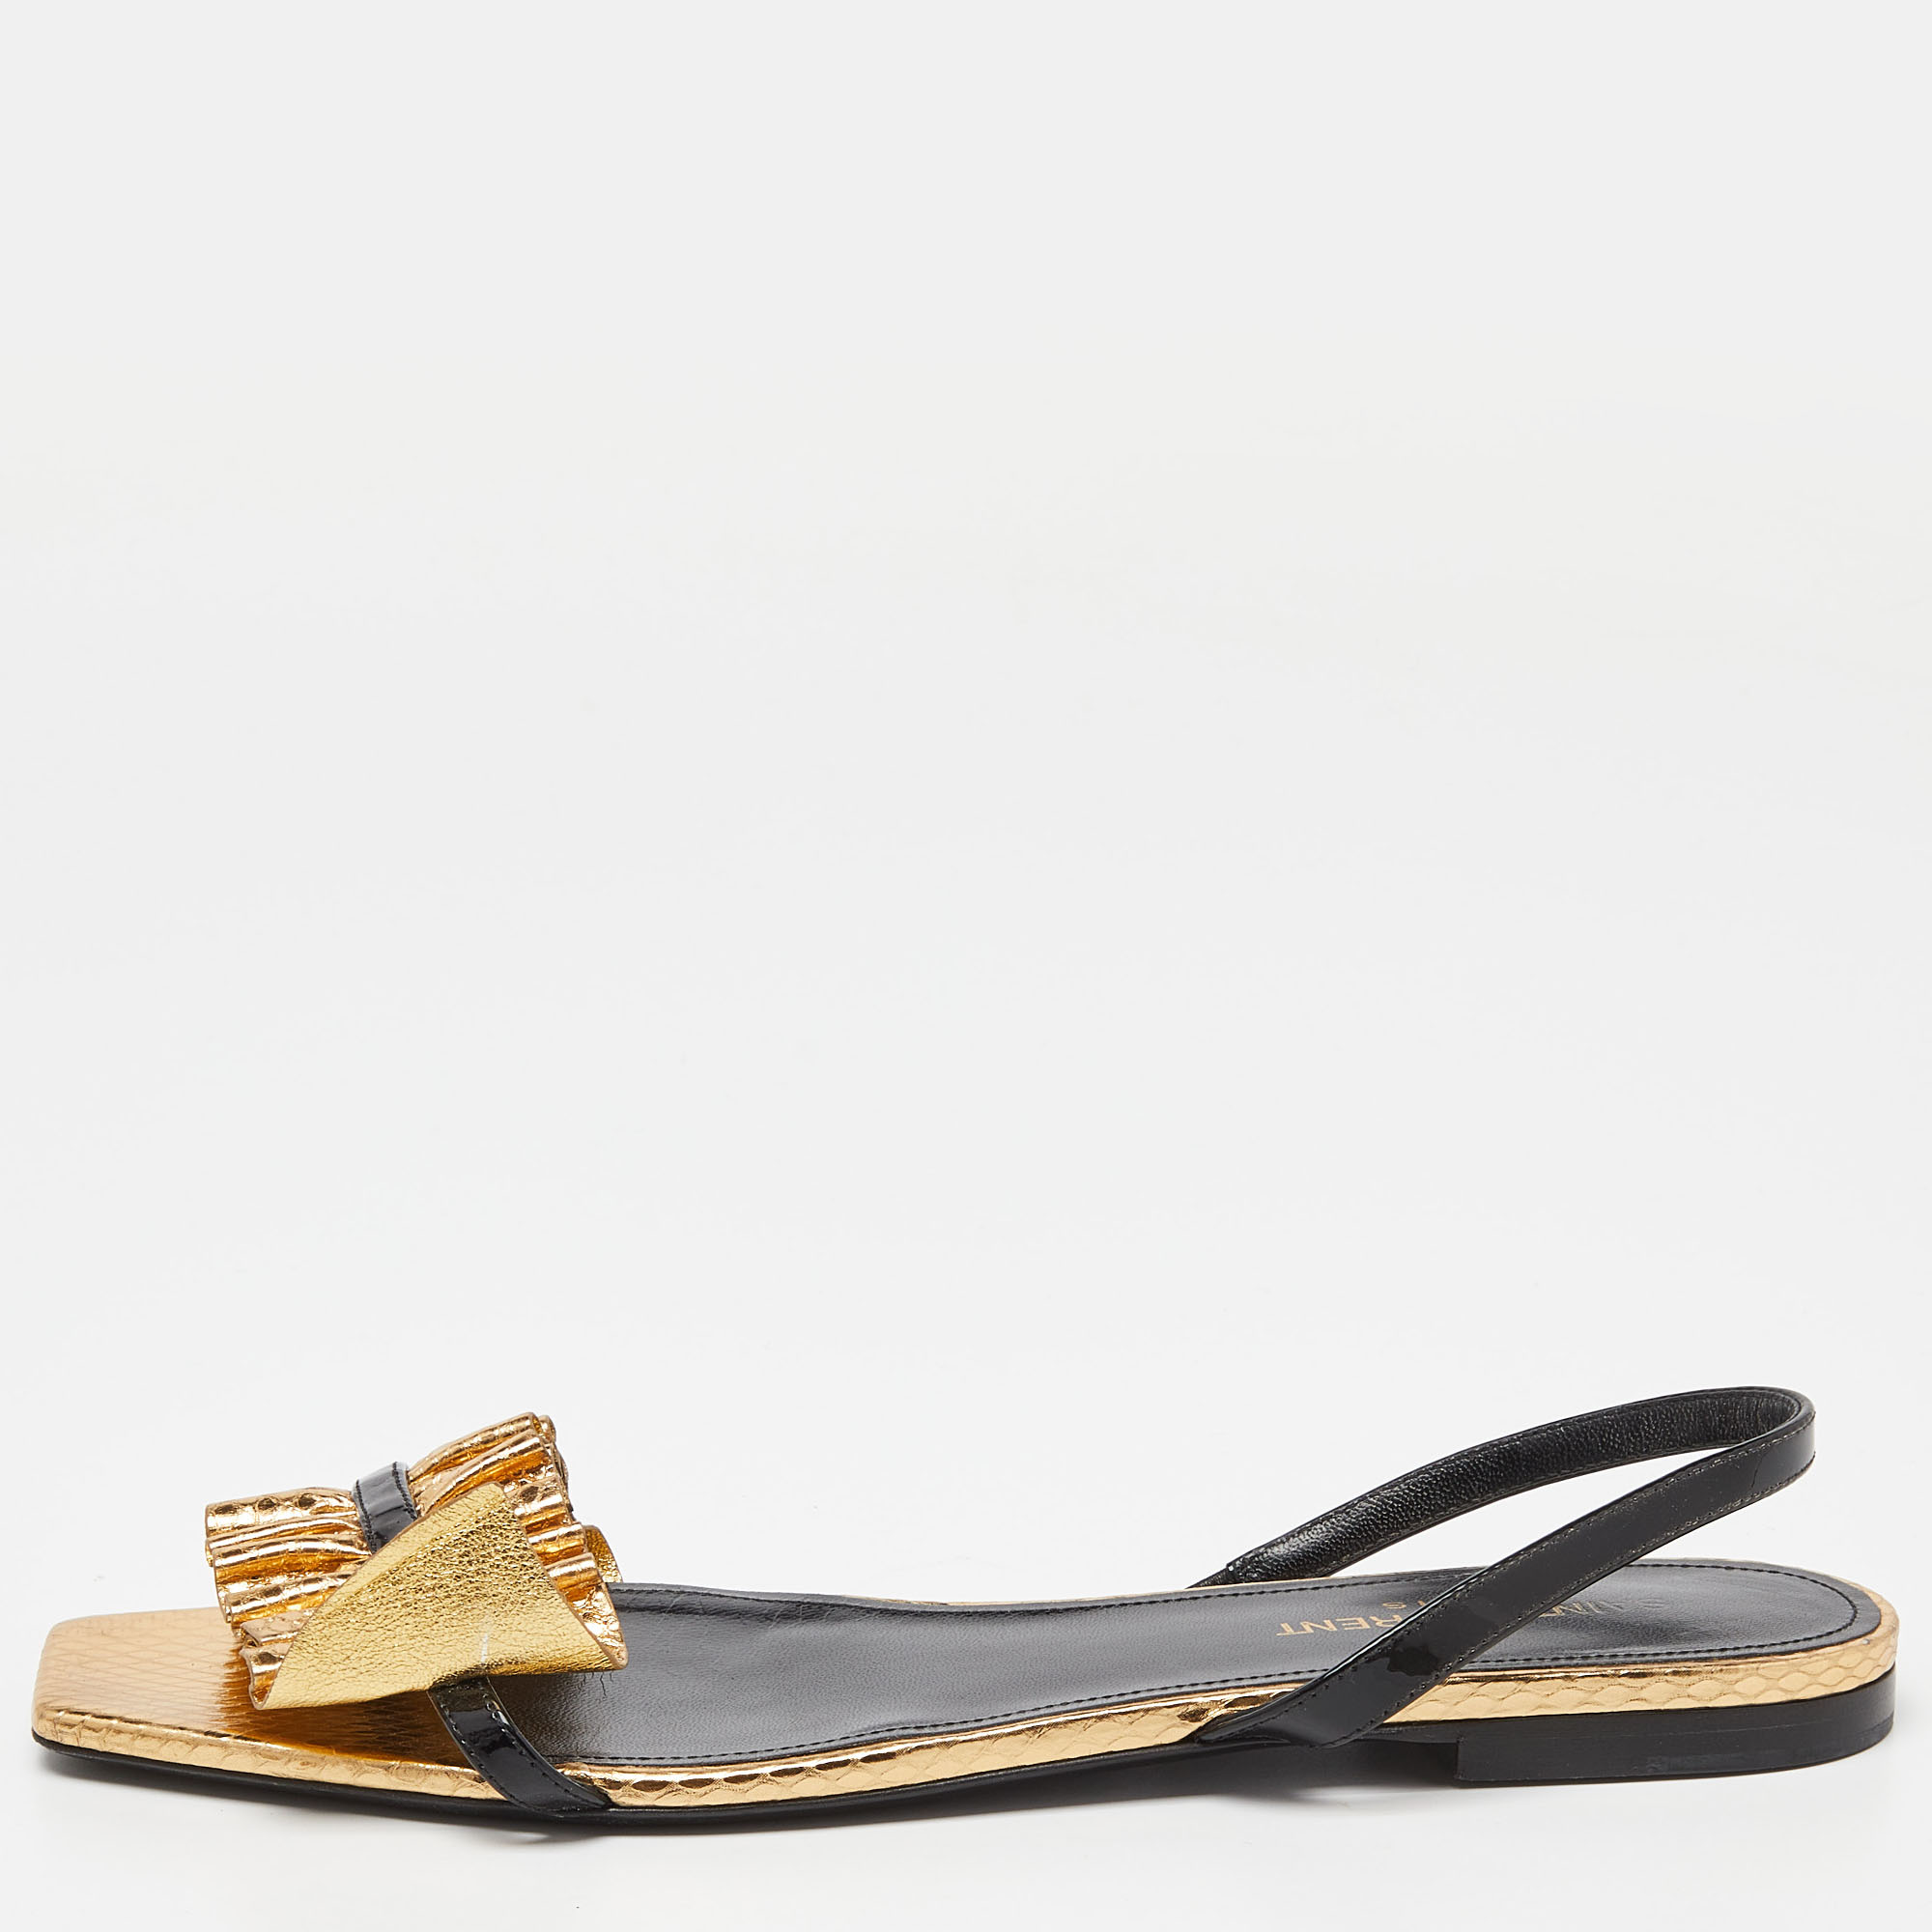 Pre-owned Saint Laurent Gold/black Python Embossed Leather Edie Slingback Flat Sandals Size 39